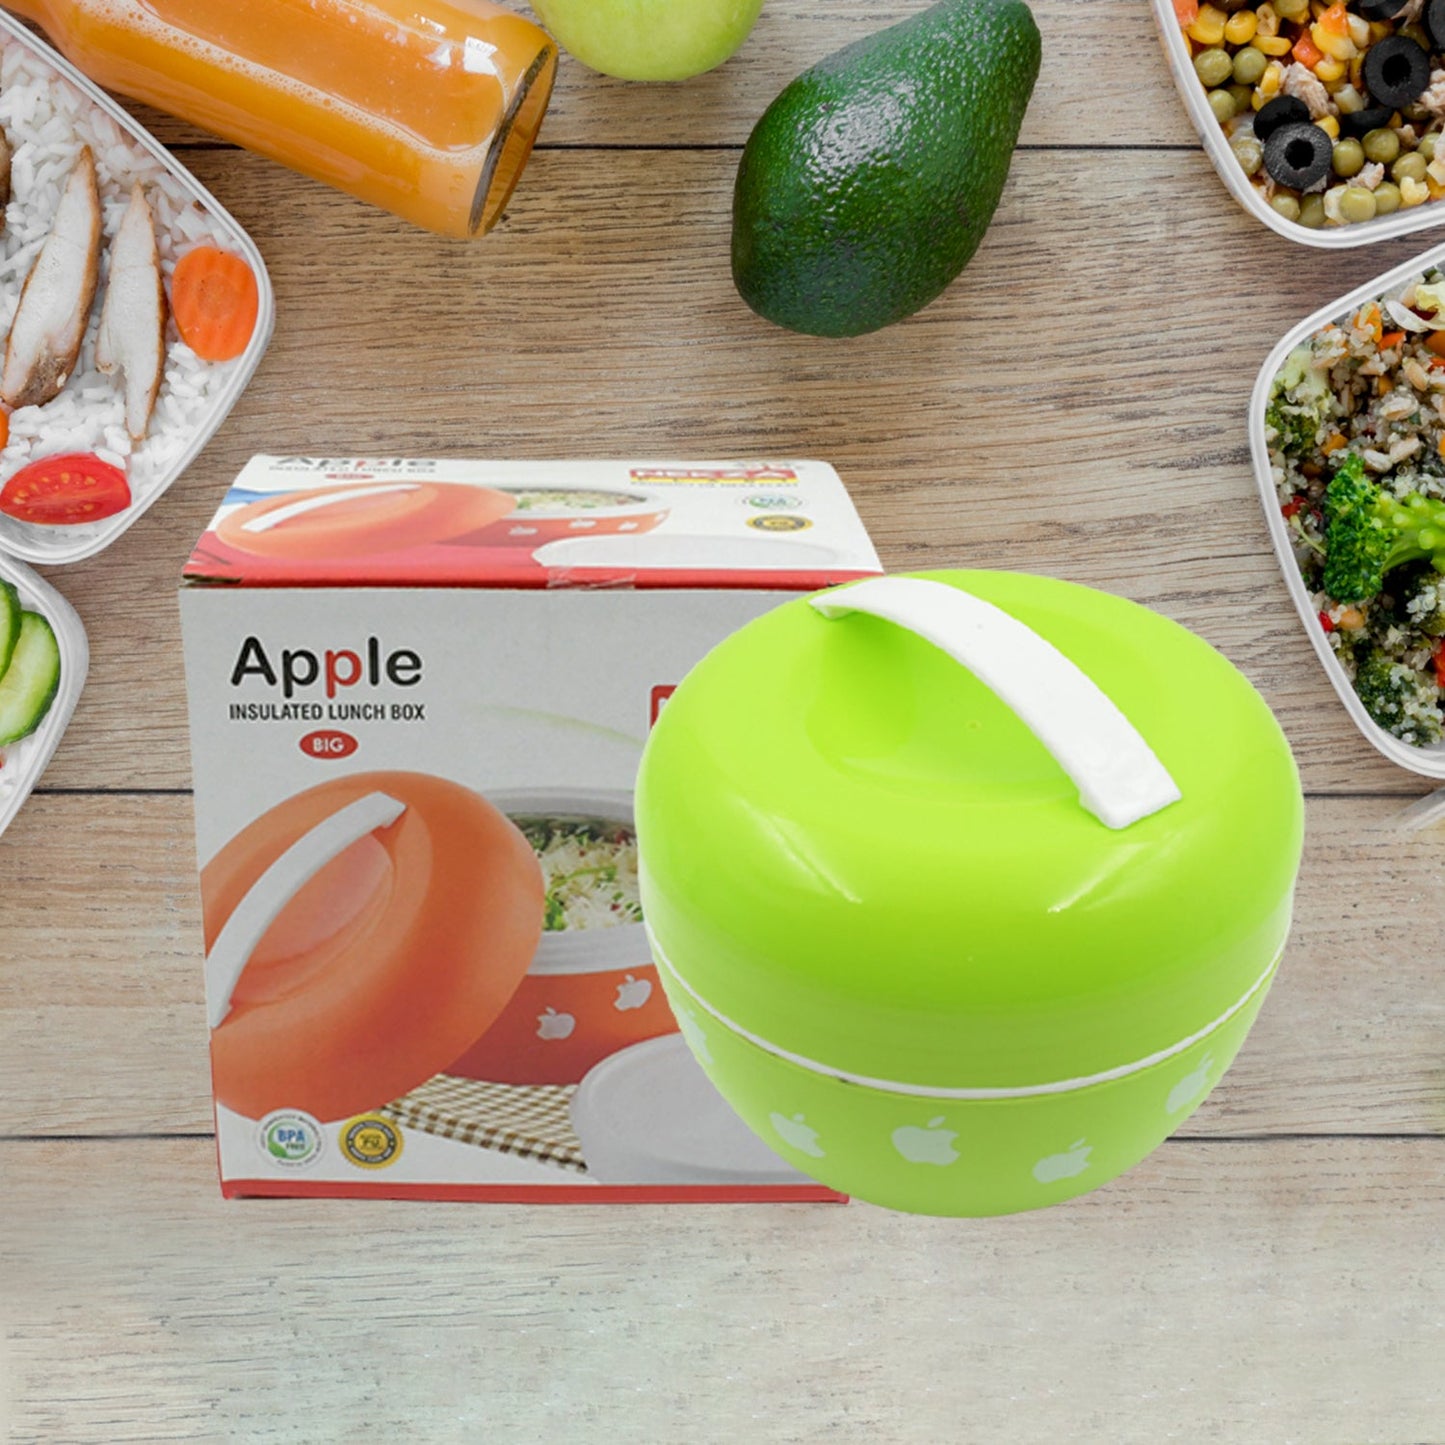 Big Apple Shape Carry Case Lunch Box Apple Fruit Storage Container for School Kids, Office, Picnic